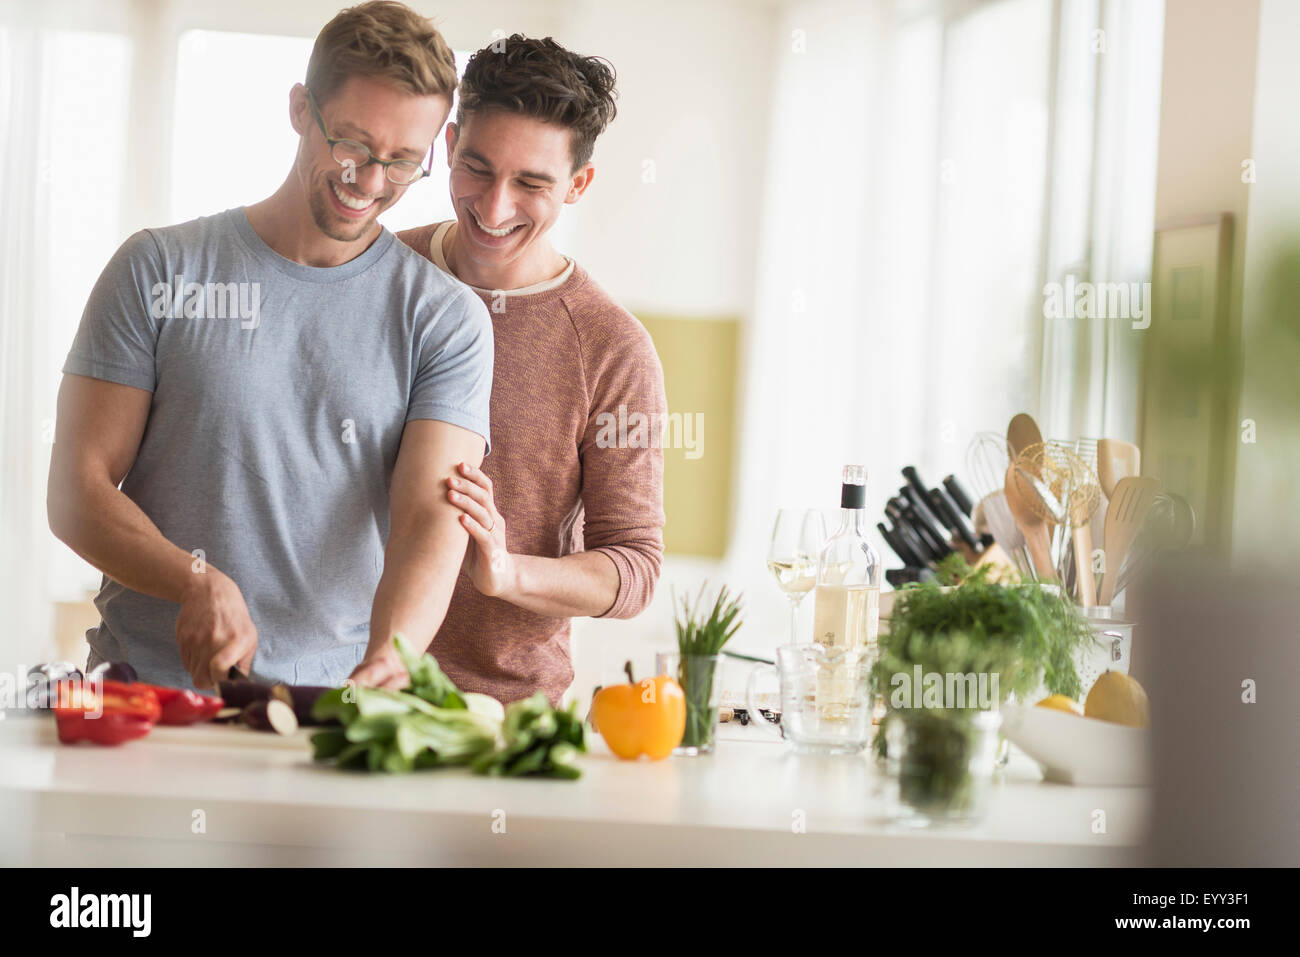 Caucasian couple gay cooking in kitchen Banque D'Images